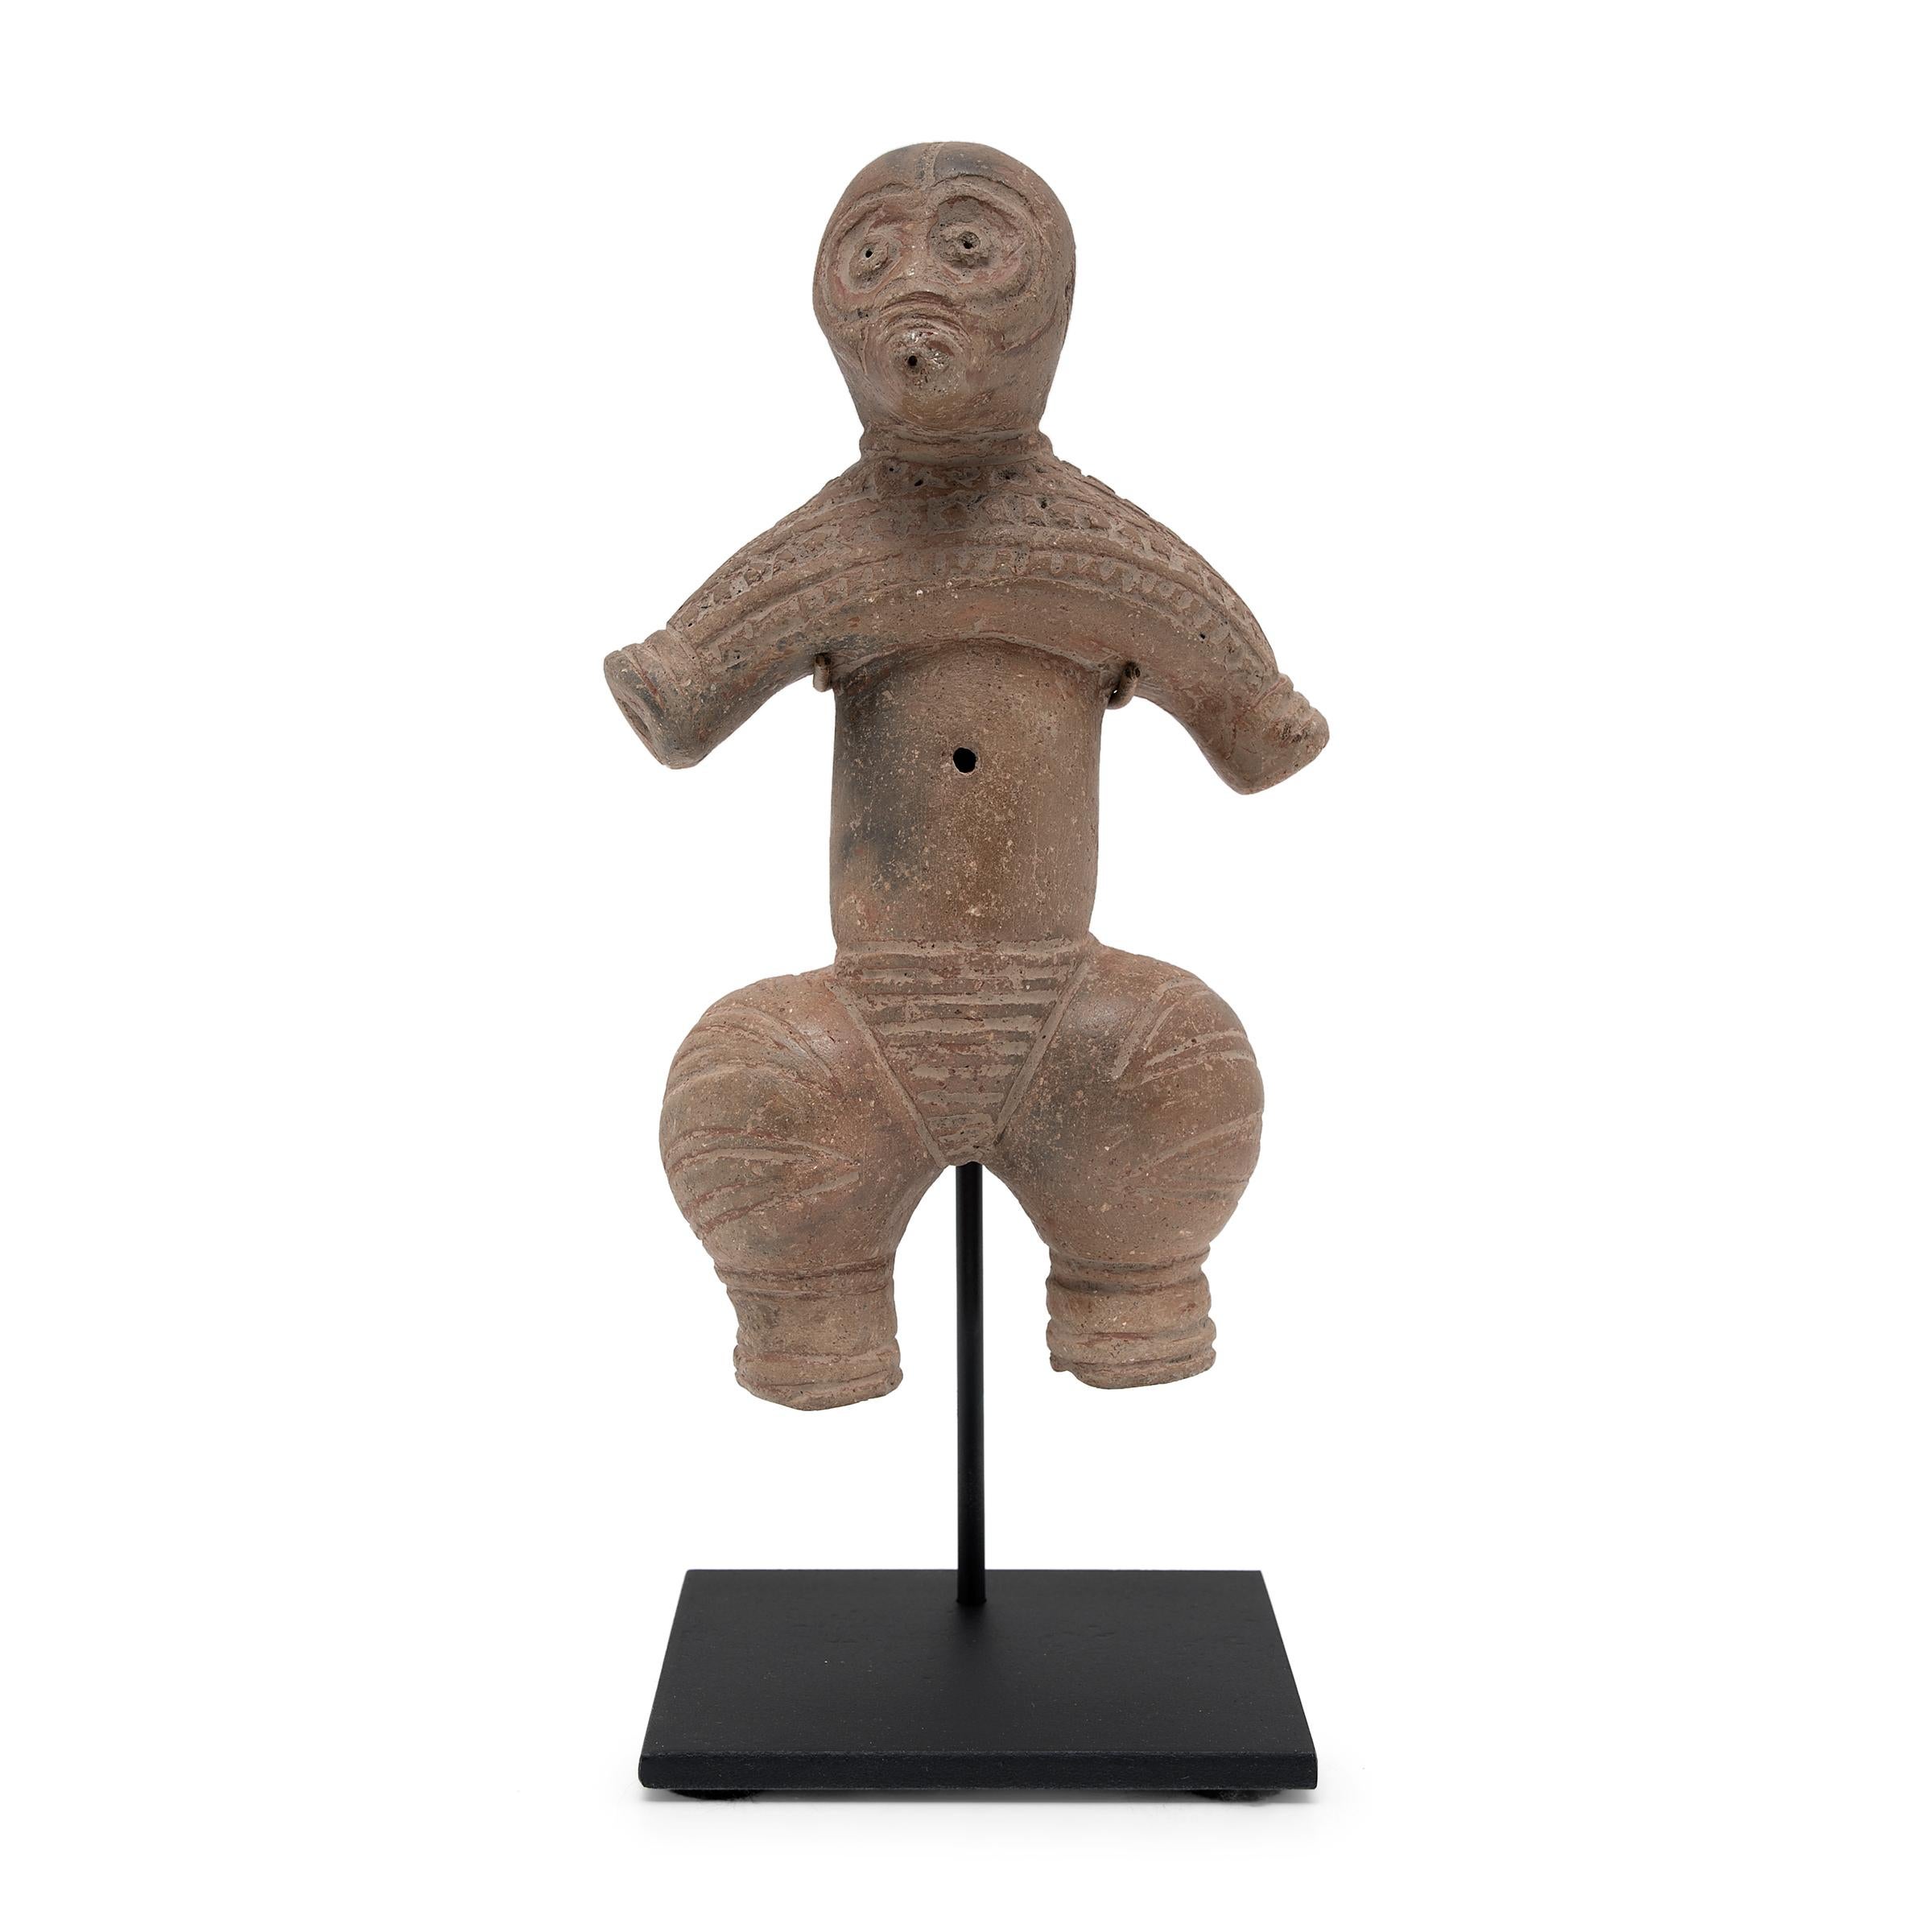 This intricately styled pair of terracotta figurines is sculpted in the style of Japanese Dogū sculptures of the Jōmon period (10th-4th century B.C.). Reminiscent of Pre-Columbian redware figures, Dogū ceramics are known for their primitive abstract